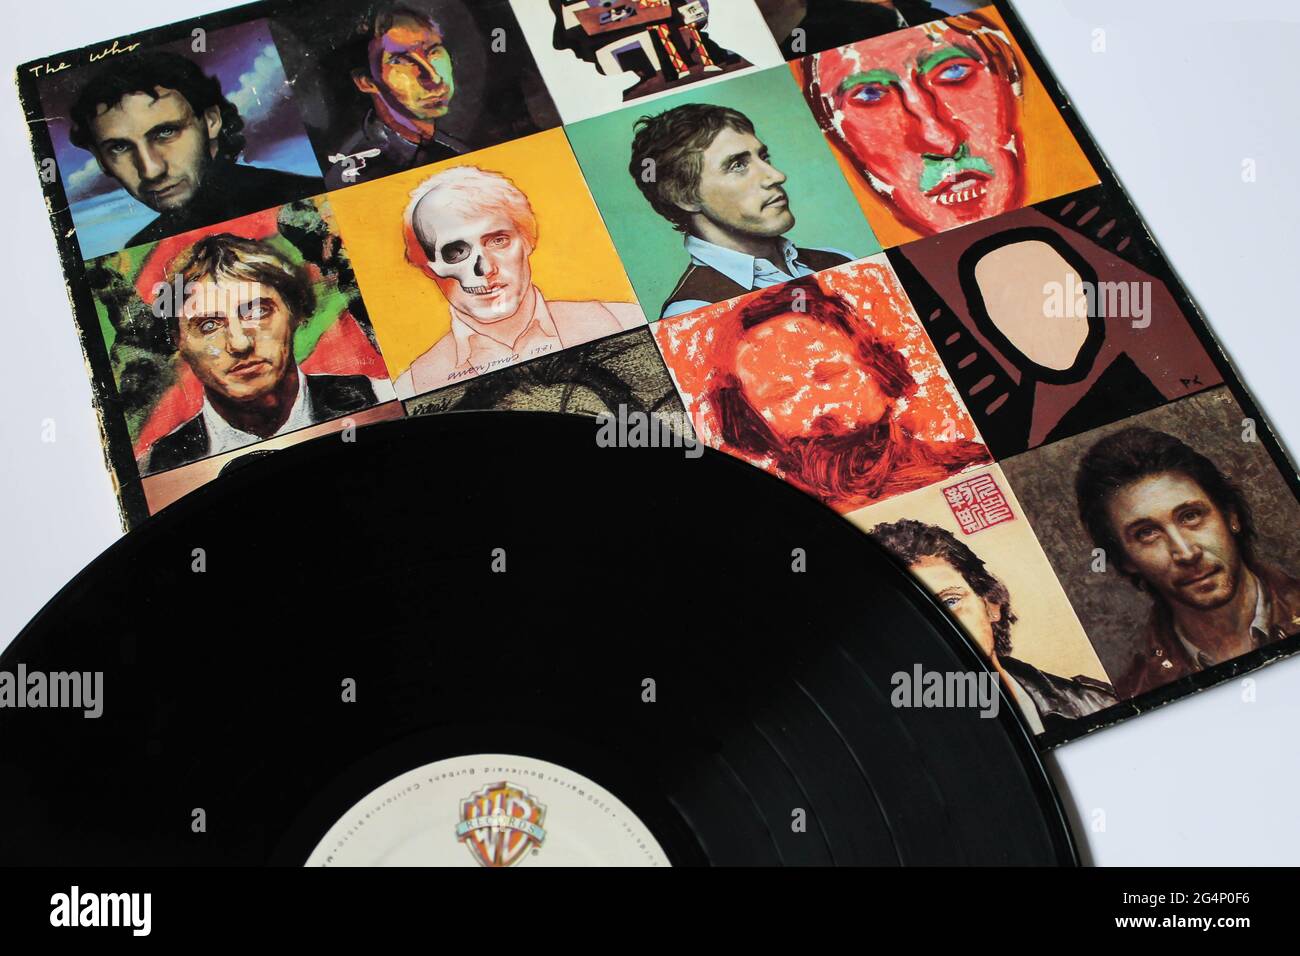 English Rock and hard rock band, The Who music album on vinyl record LP disc. Titled: Face Dances album cover Stock Photo